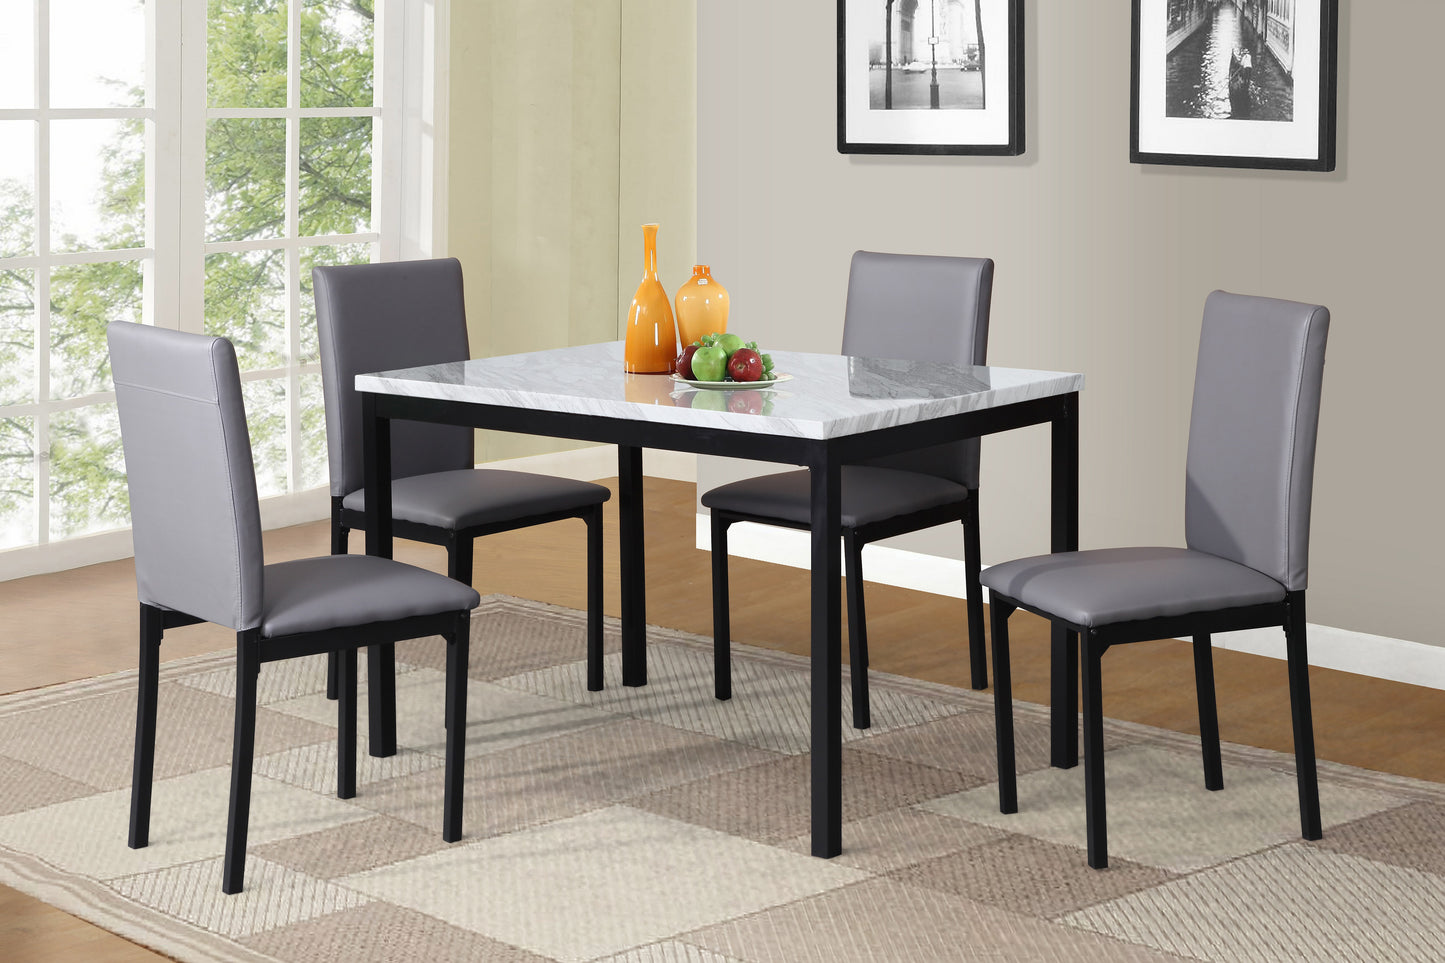 Citico 5-Piece Metal Dinette Set with Laminated Off-white Faux Marble Top, 4 Gray Chairs